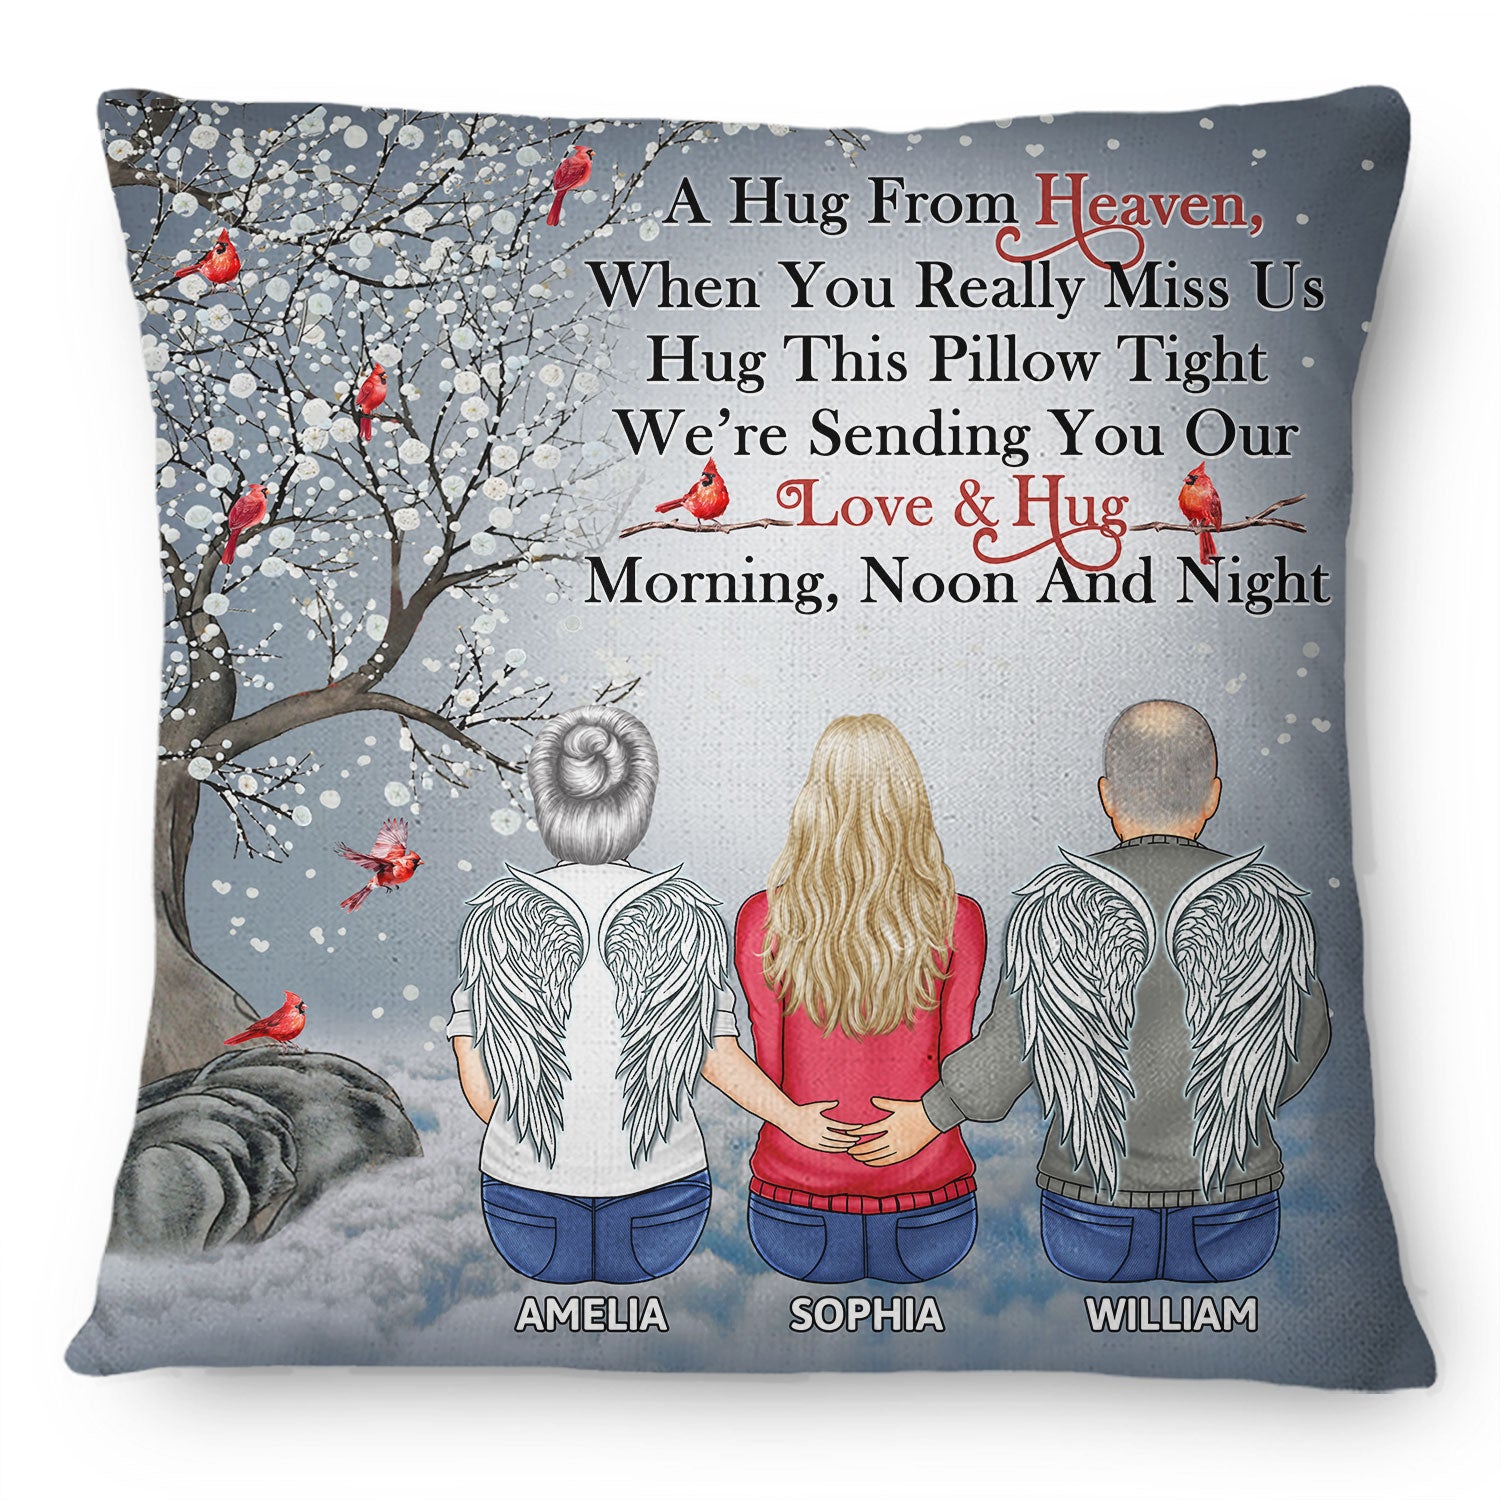 A Hug From Heaven - Memorial Gift For Family, Siblings, Friends - Personalized Pillow